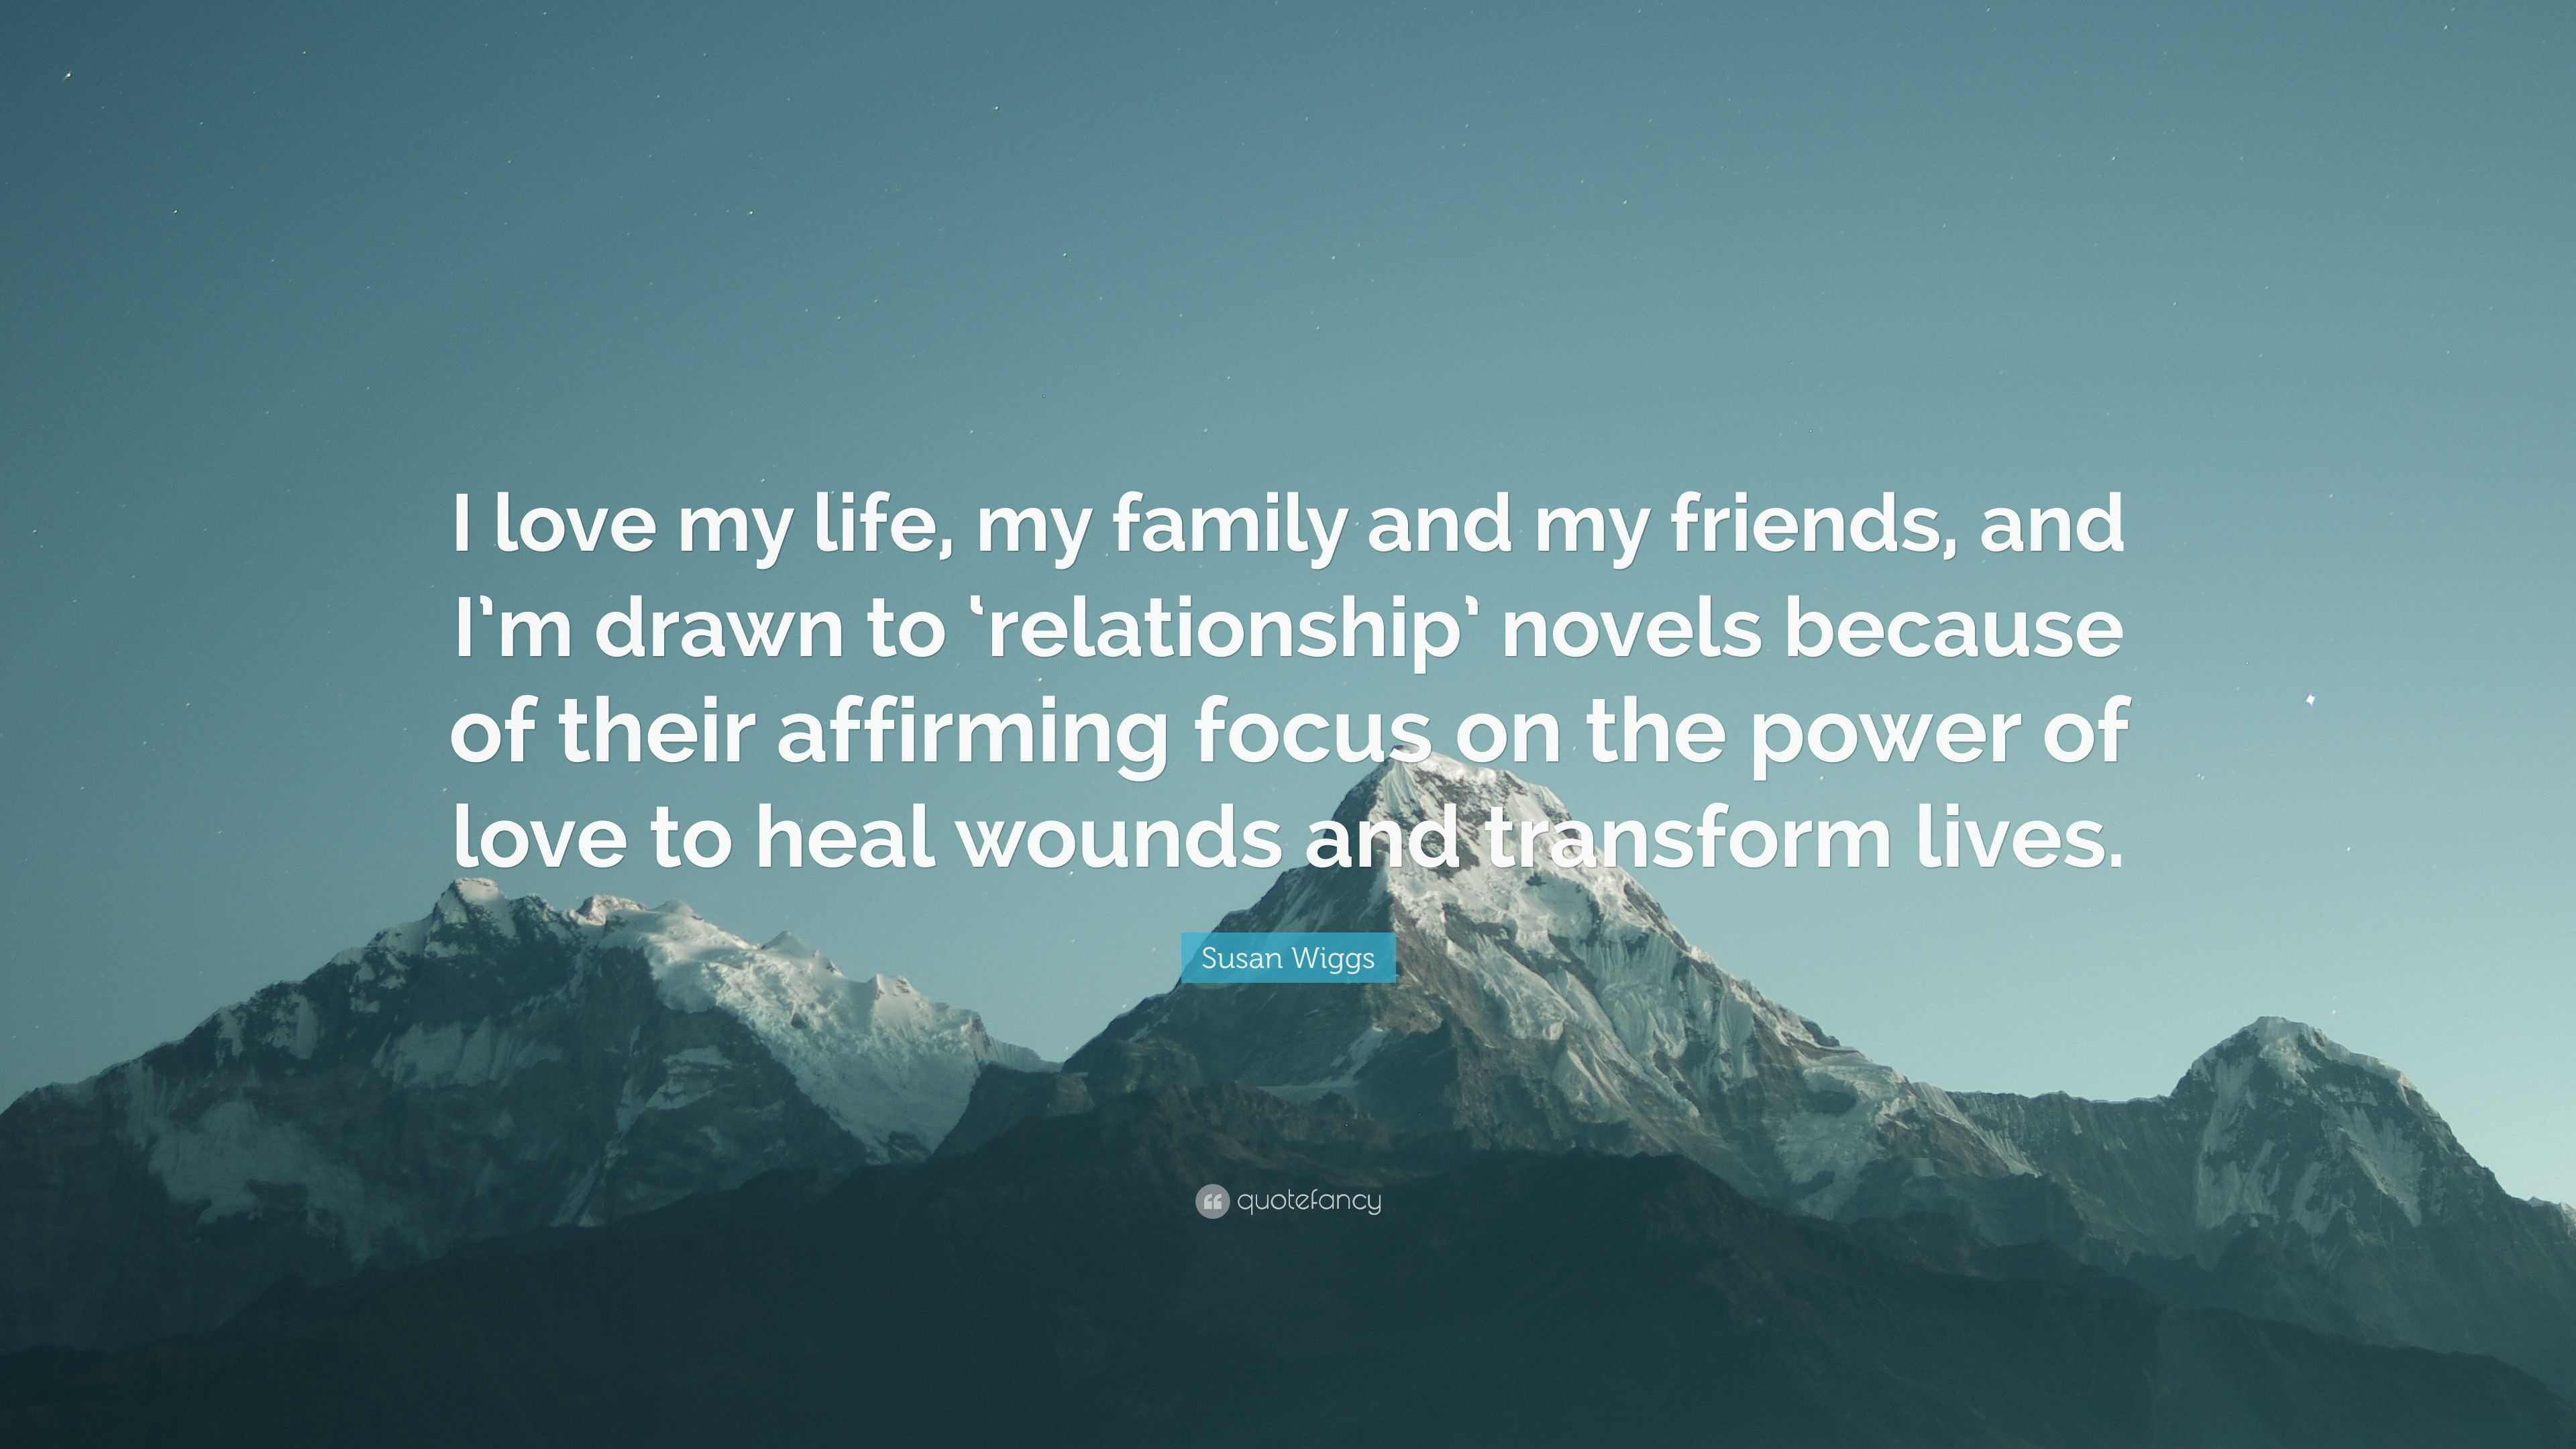 Susan Wiggs Quote “I love my life my family and my friends